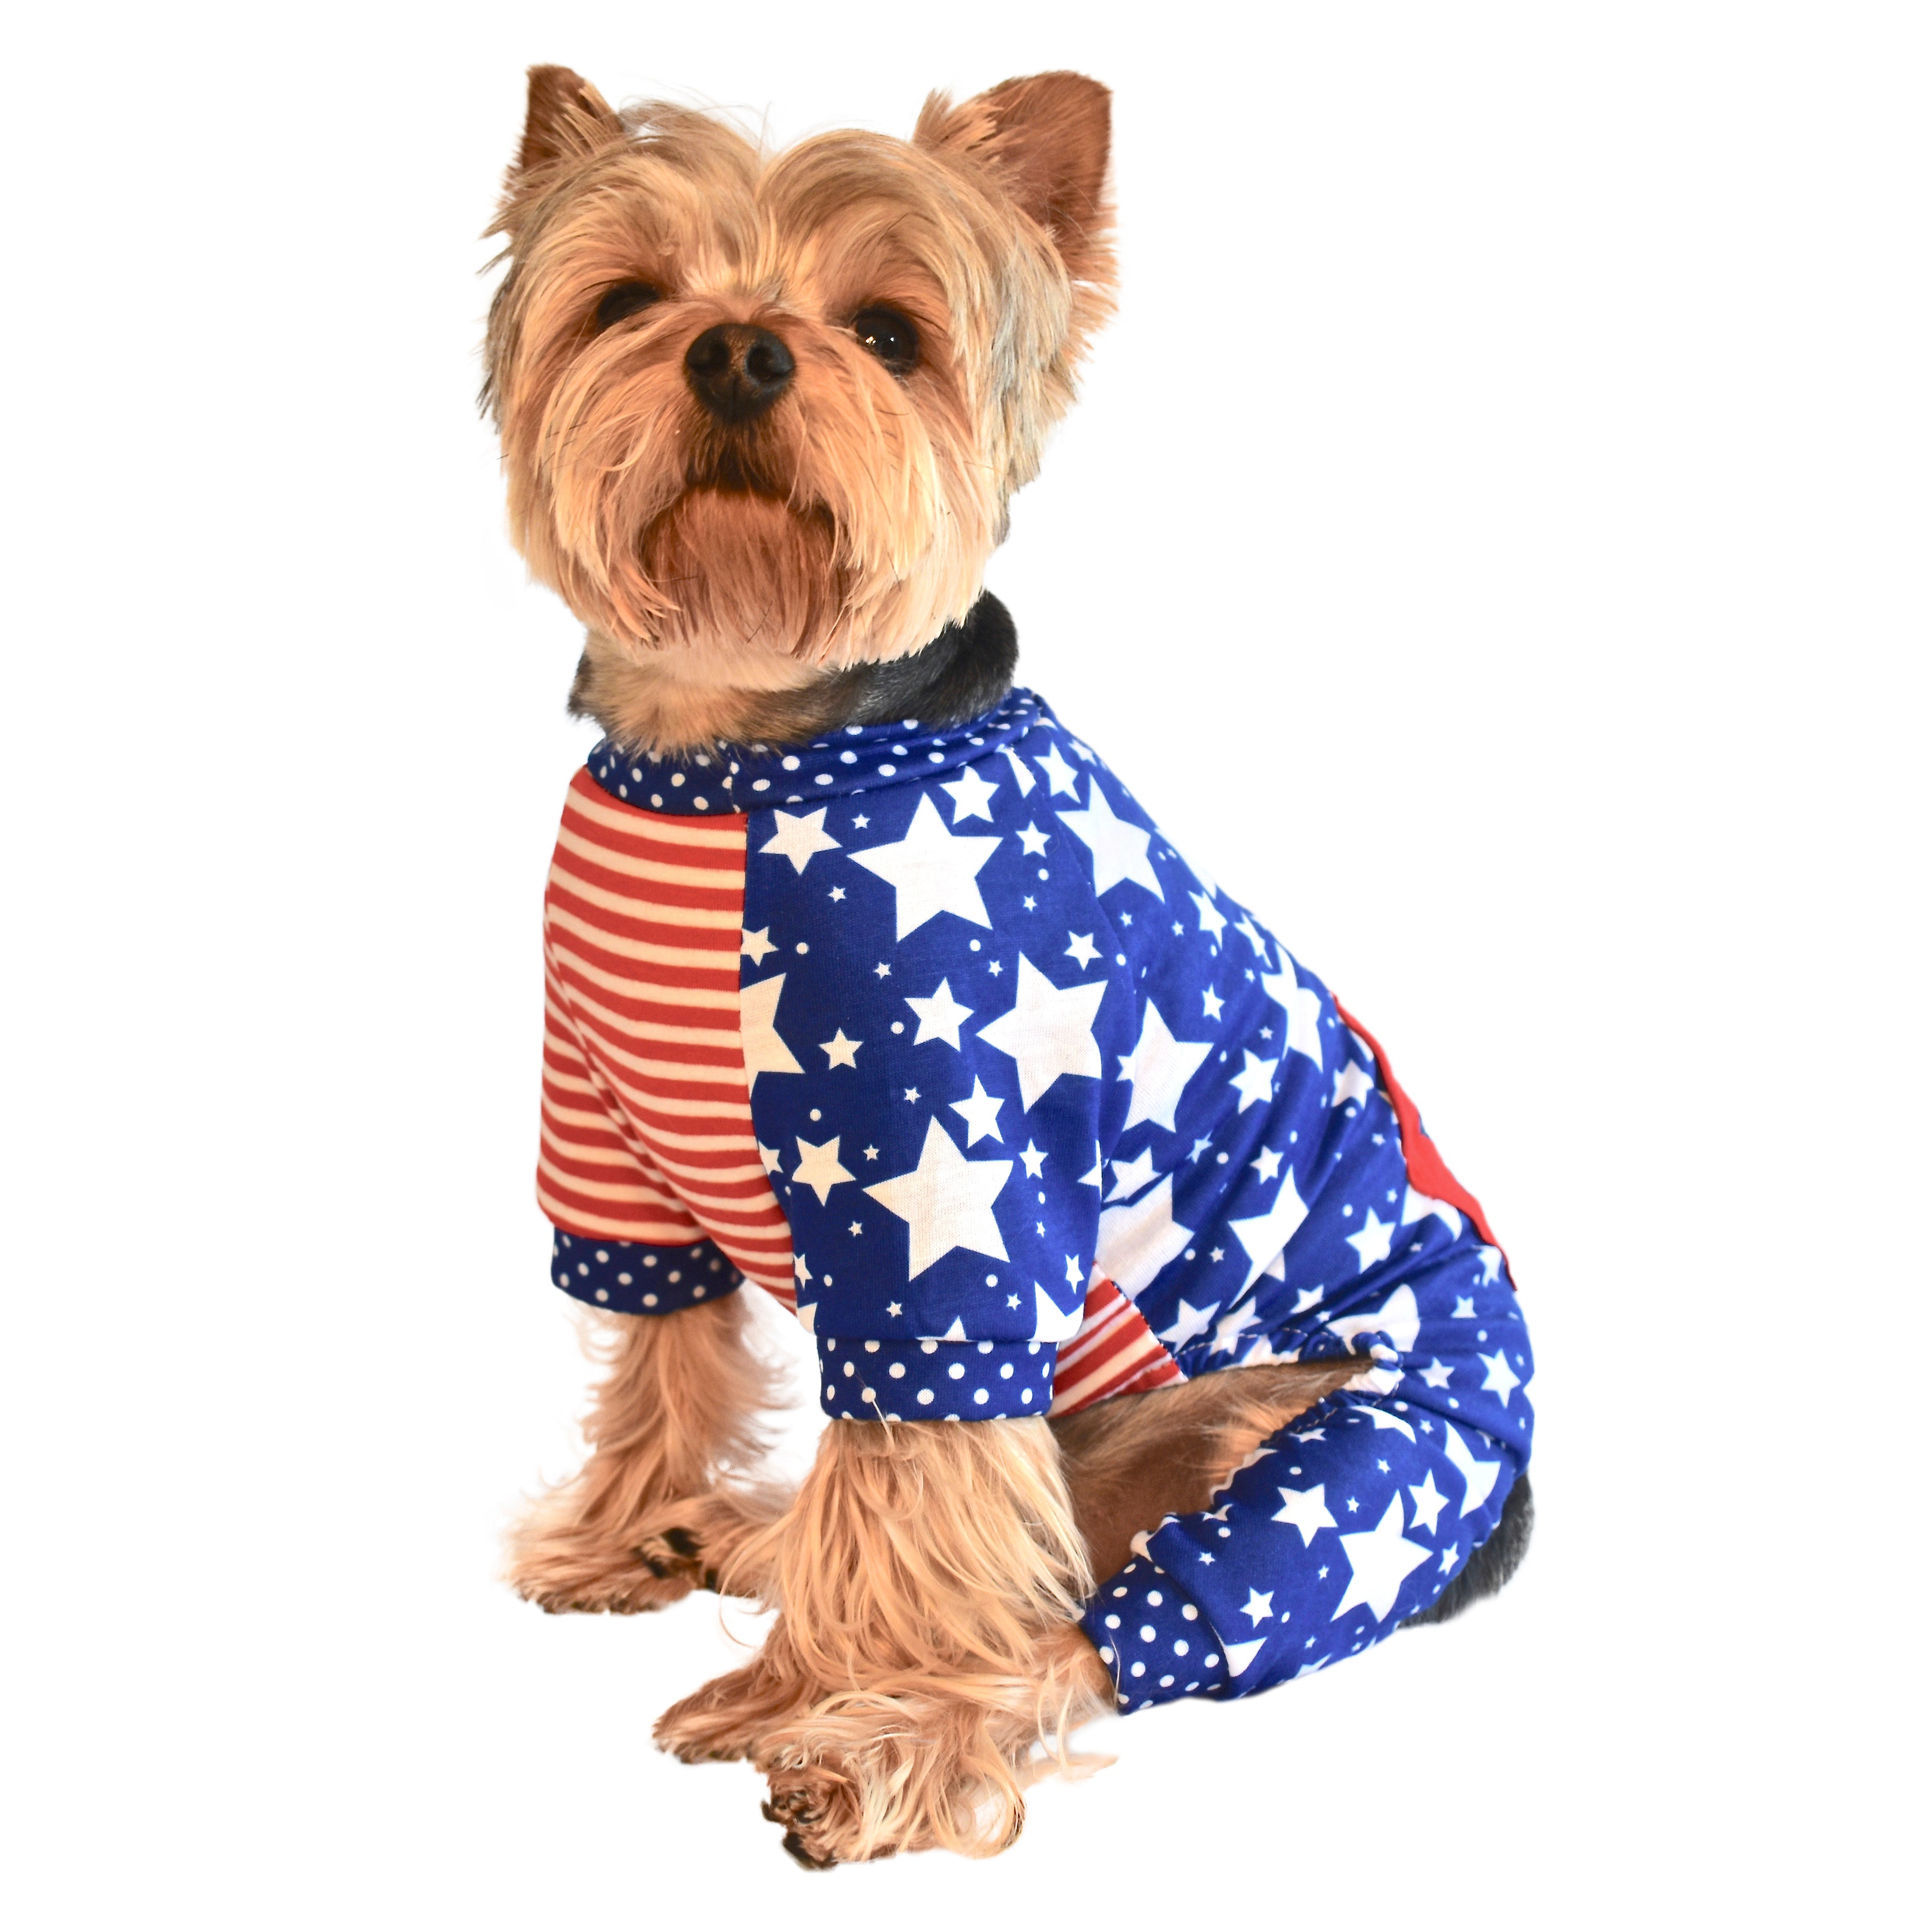 Picture of Americana Stars & Stripes Jammies